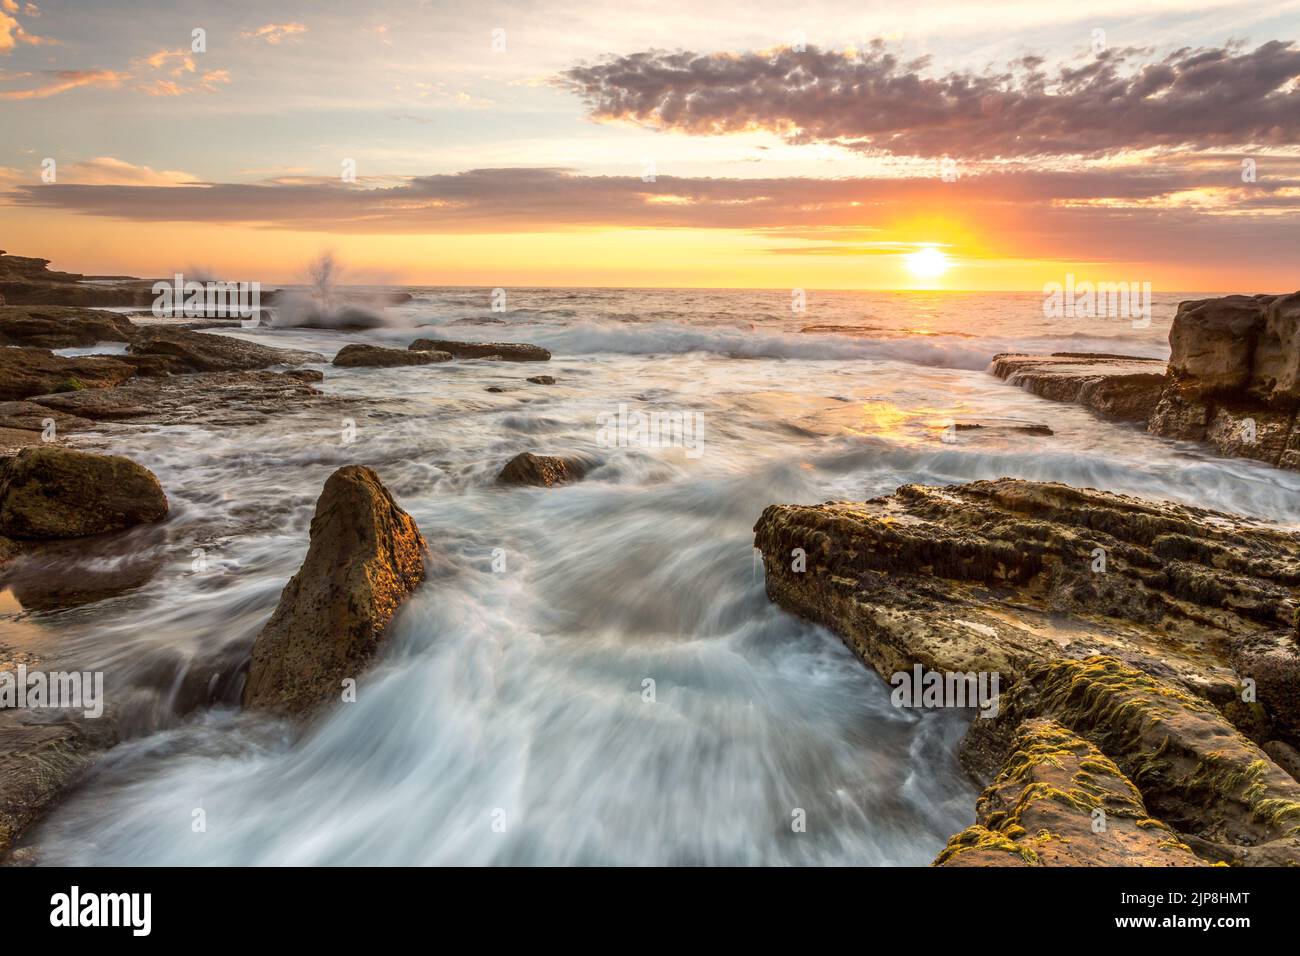 Beautiful coastal sunrise.  Waves flow over the rocky seashore and splash upwards in various directions,  A golden orange sunrise lights the pretty  s Stock Photo